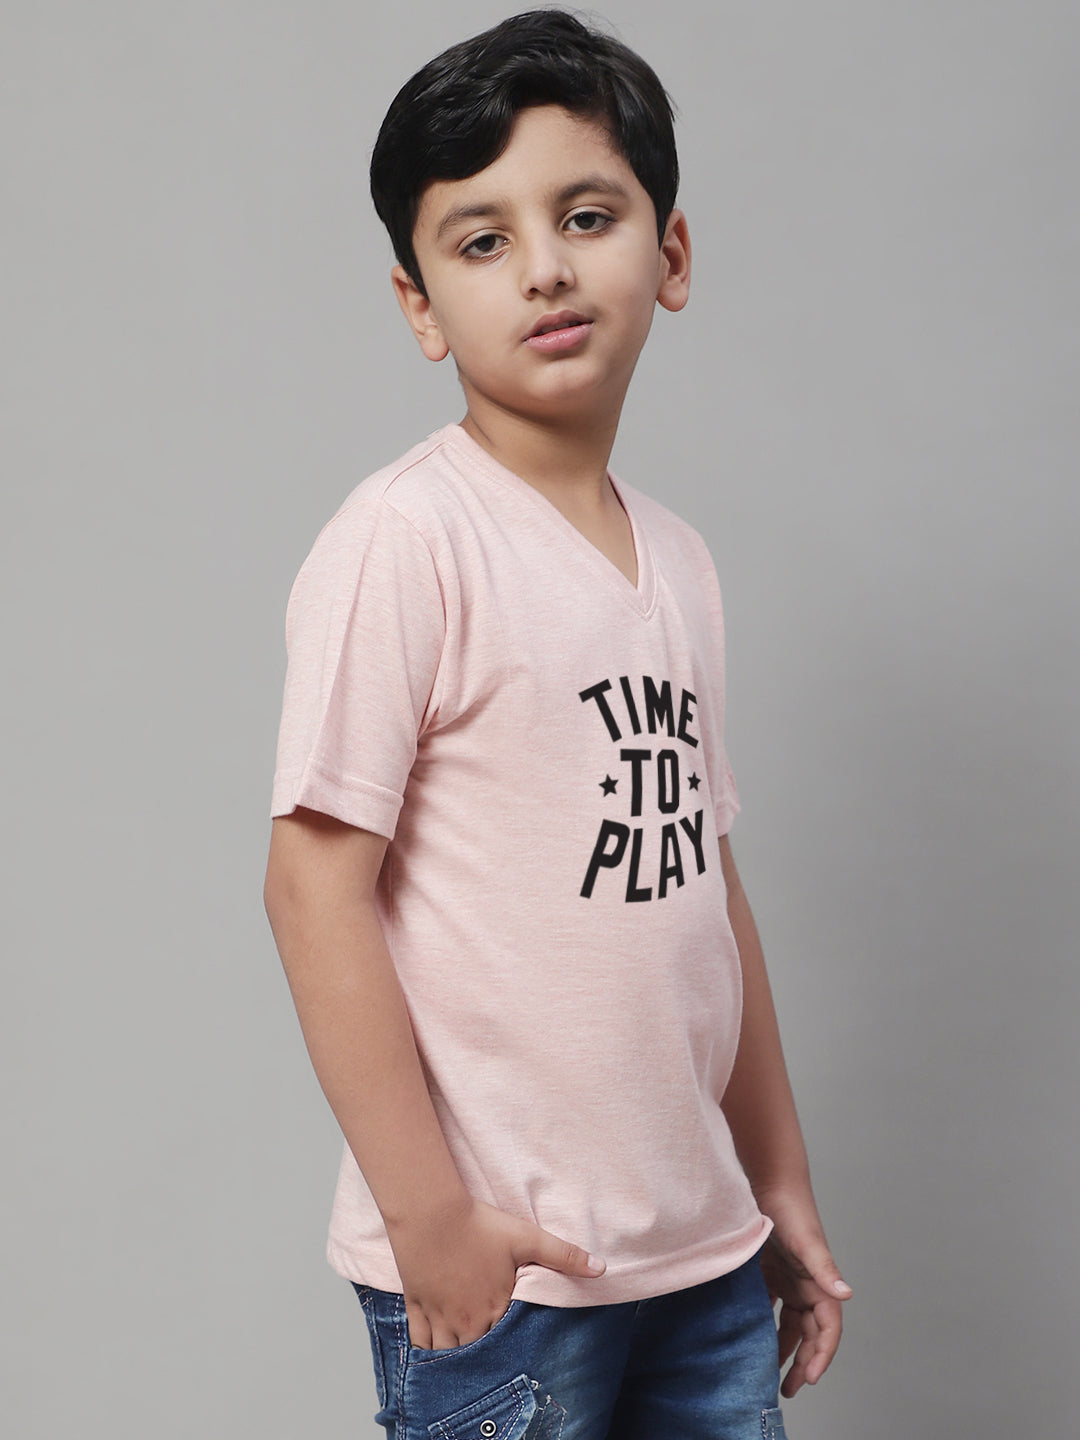 Boys Time To Play Half Sleeves Printed T-Shirt - Friskers